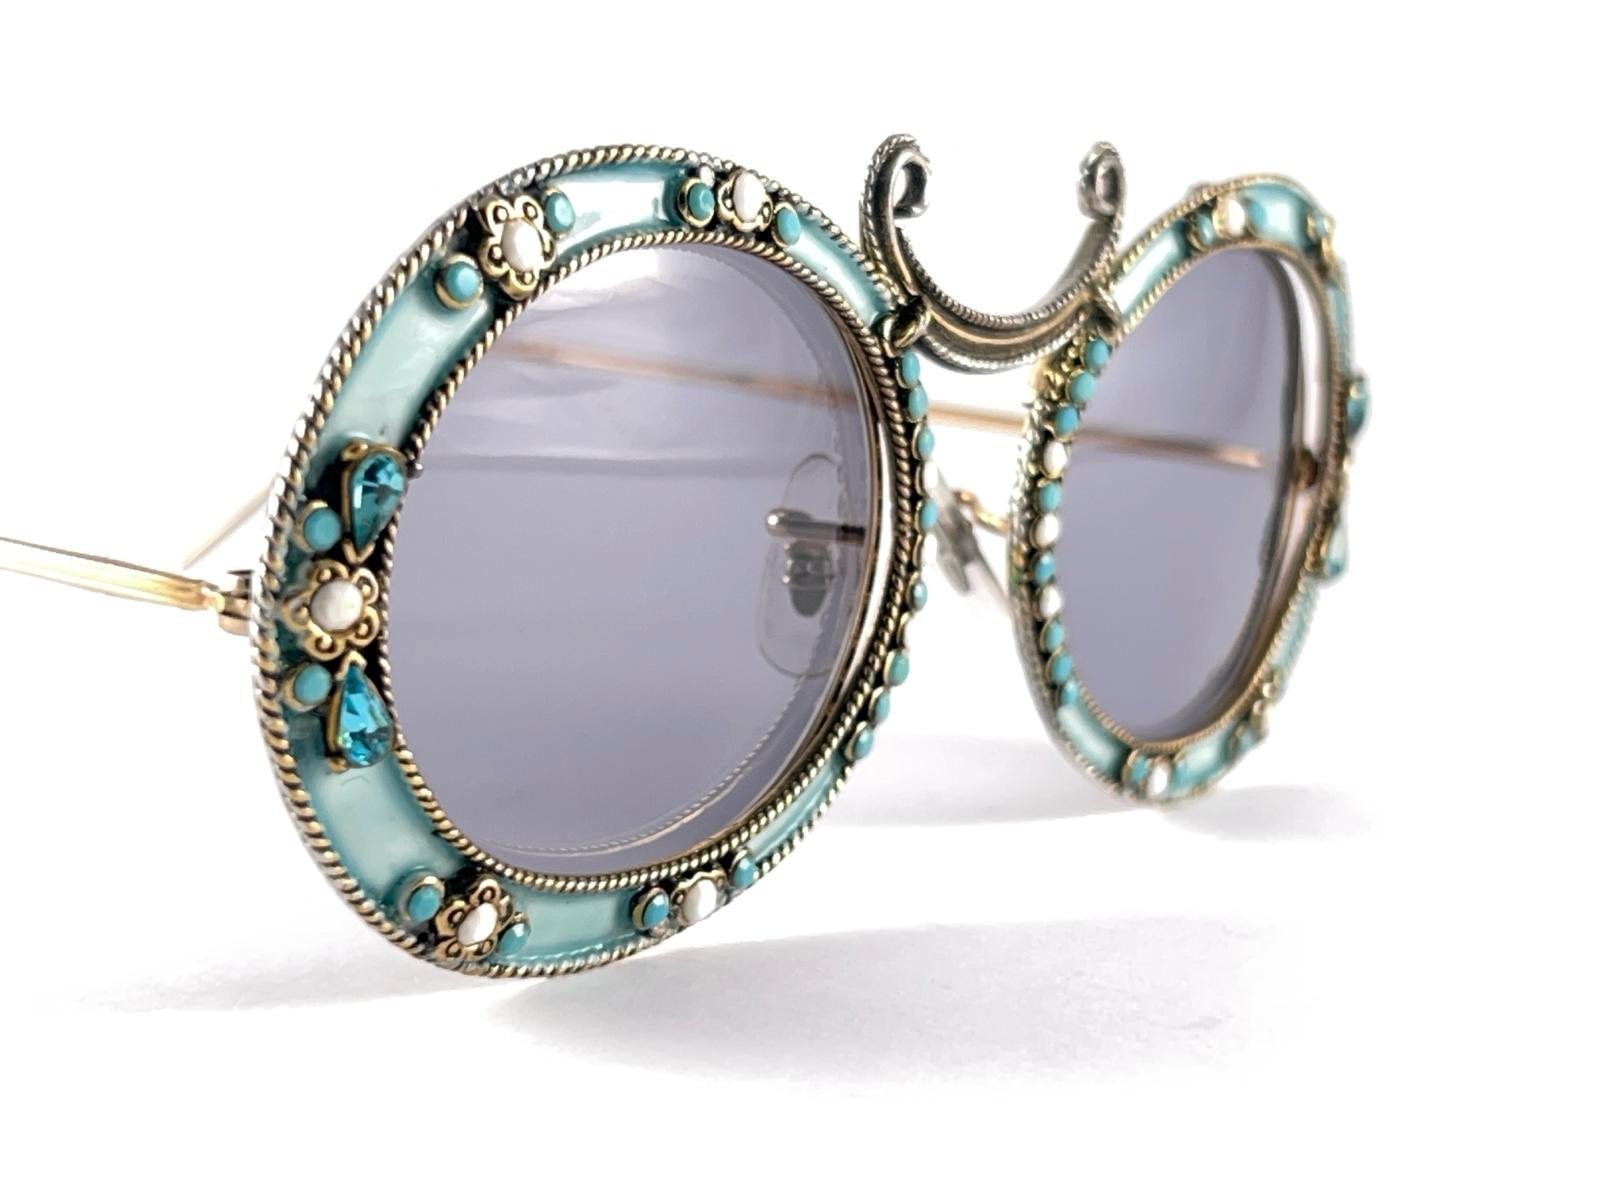 Ultra rare pair of Christian Dior Sunglasses circa 1960's by Tura.  

This is a seldom and rare piece not only for its aesthetic value but for its importance in the sunglasses and fashion history.   
Delicate enamel ornamented cast iron frame with